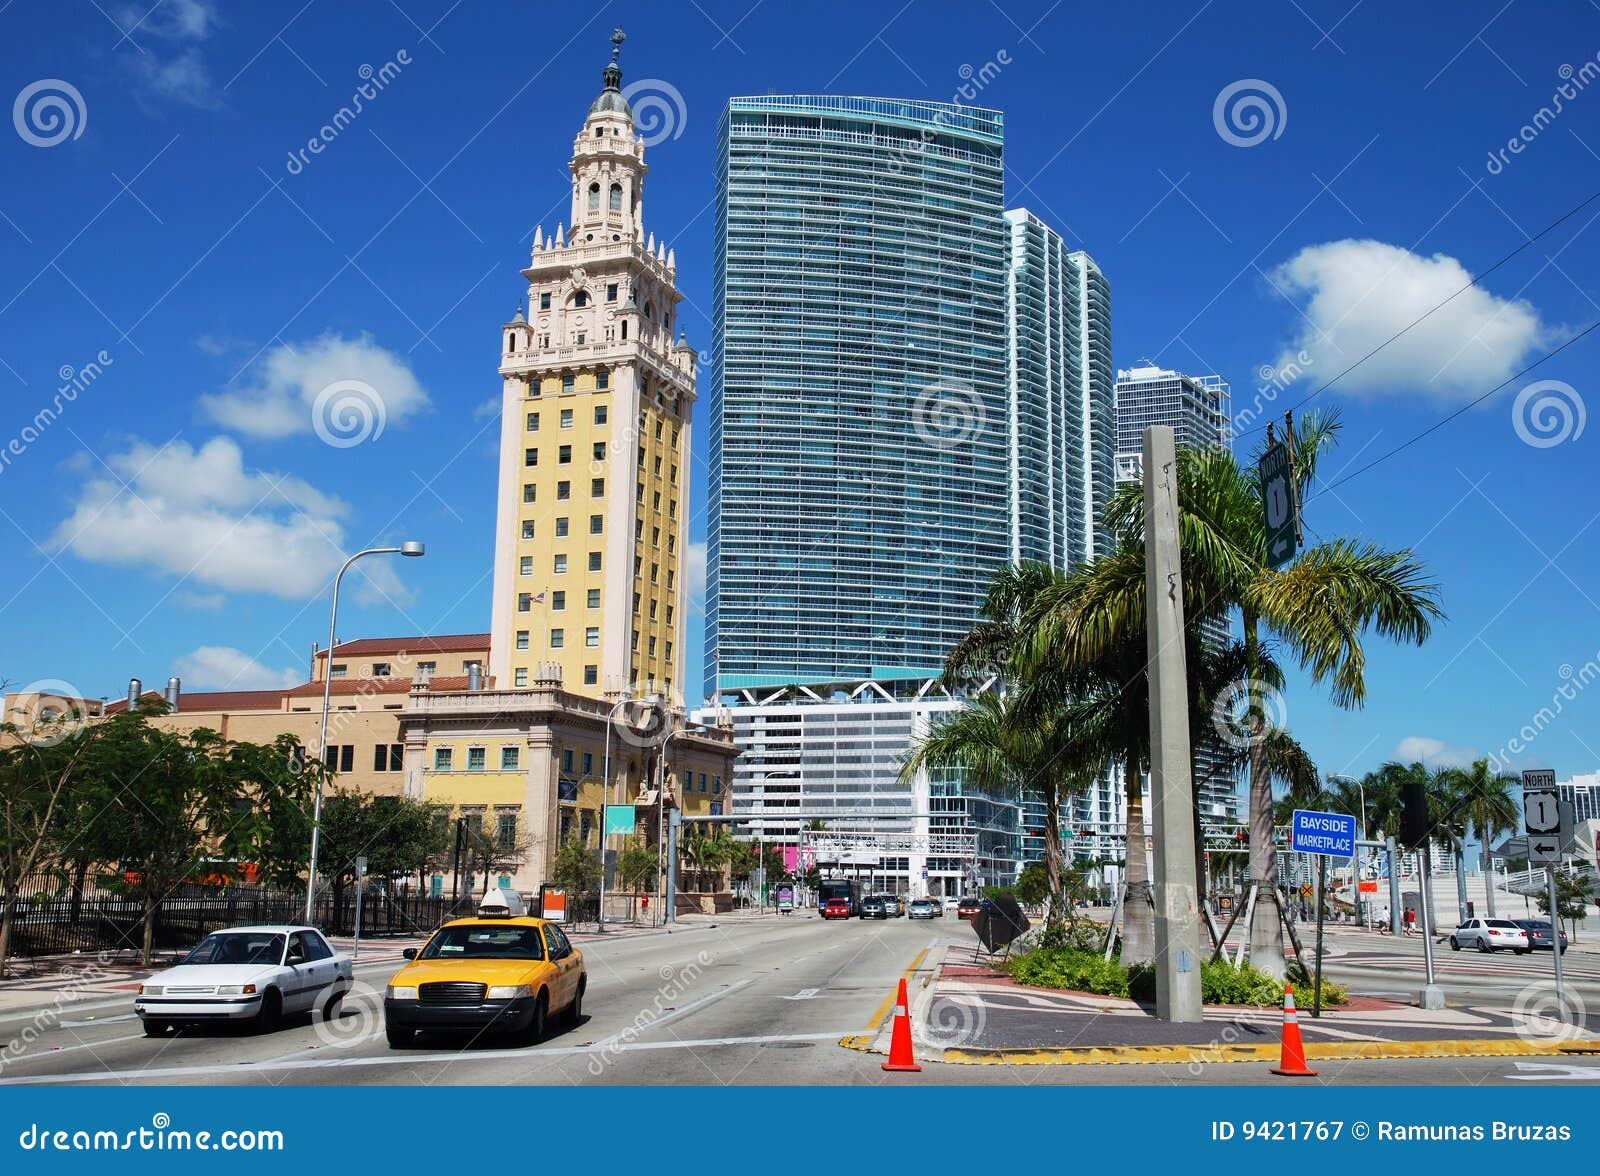 Old And New In Miami stock image. Image of town, palms - 9421767